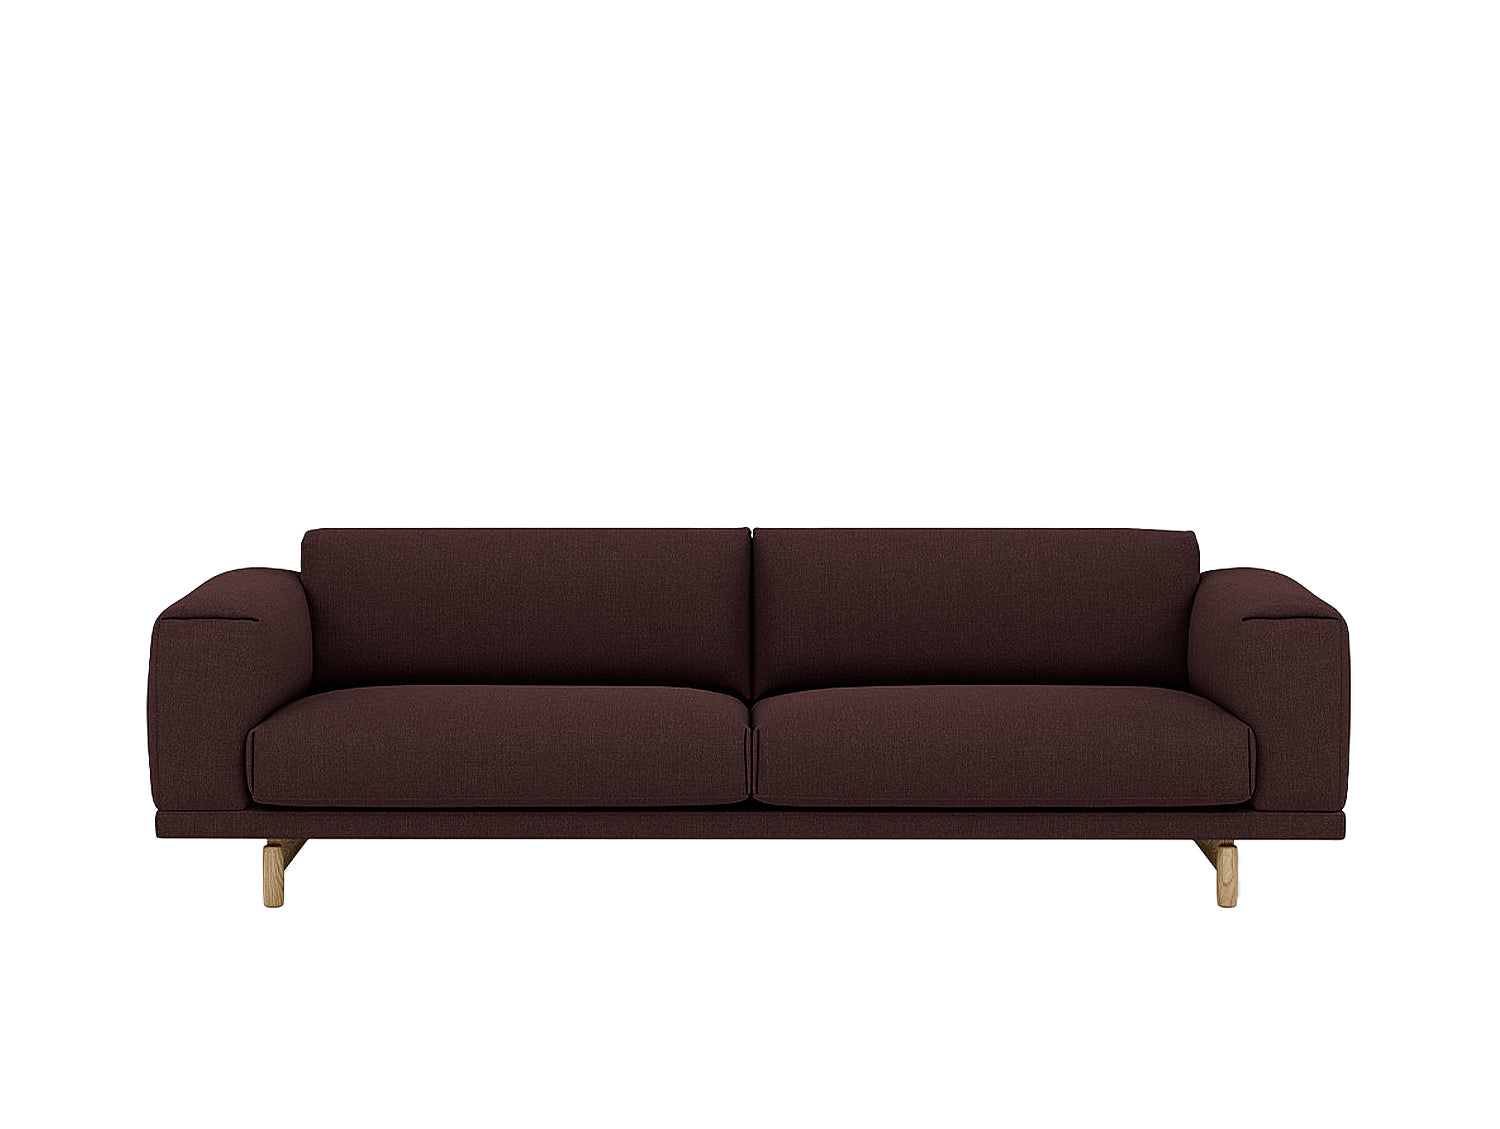 Rest Sofa by Muuto - 3 Seater / Remix 373